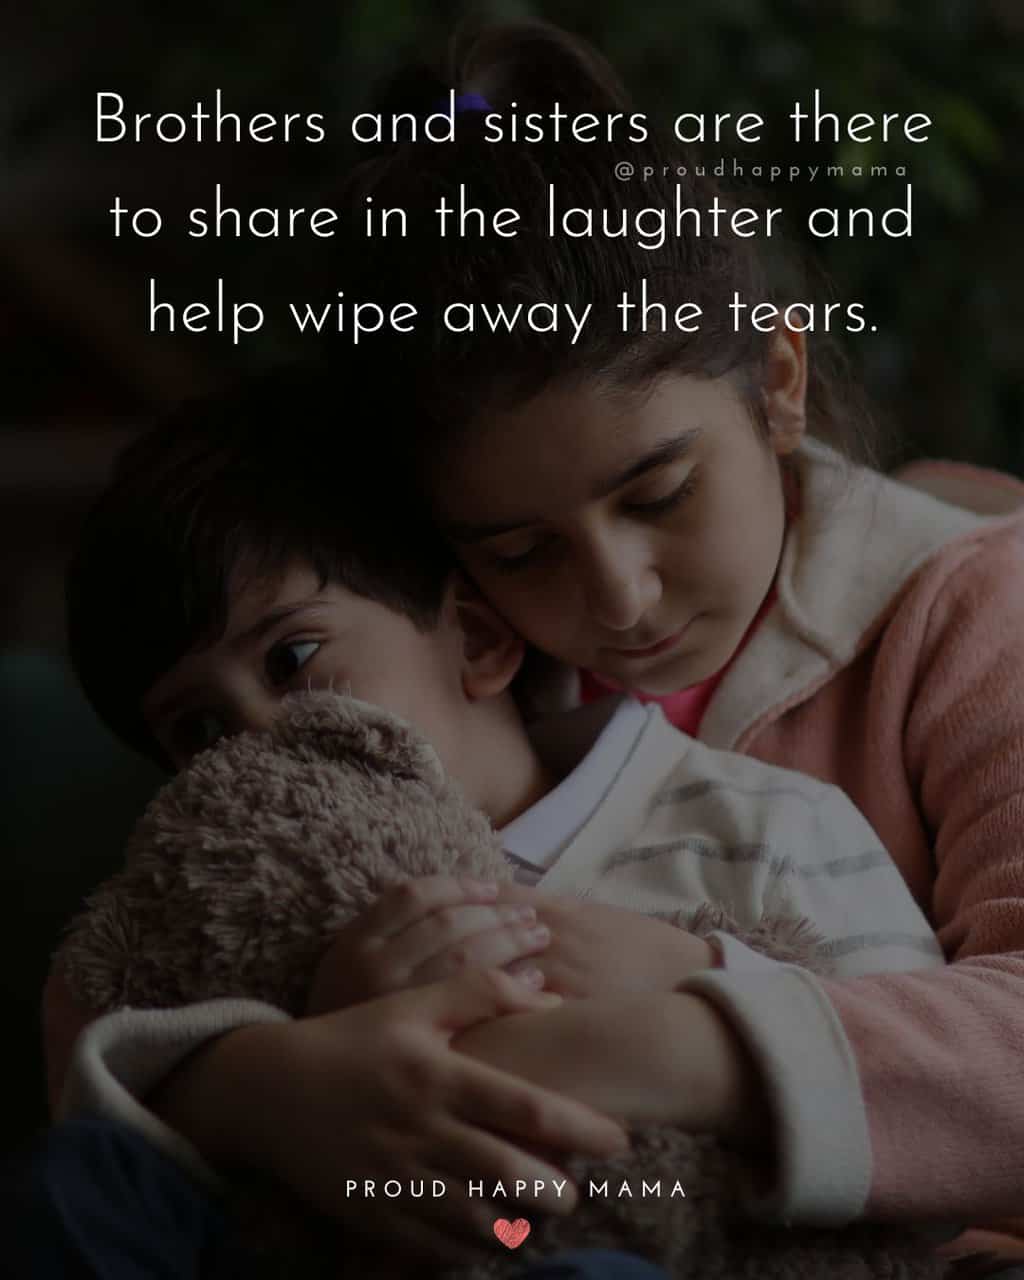 Sister in pink jacket hugging younger brother with brotherly sisterly quote text overlay. ‘Brothers and sisters are there to share in the laughter and help wipe away the tears.’